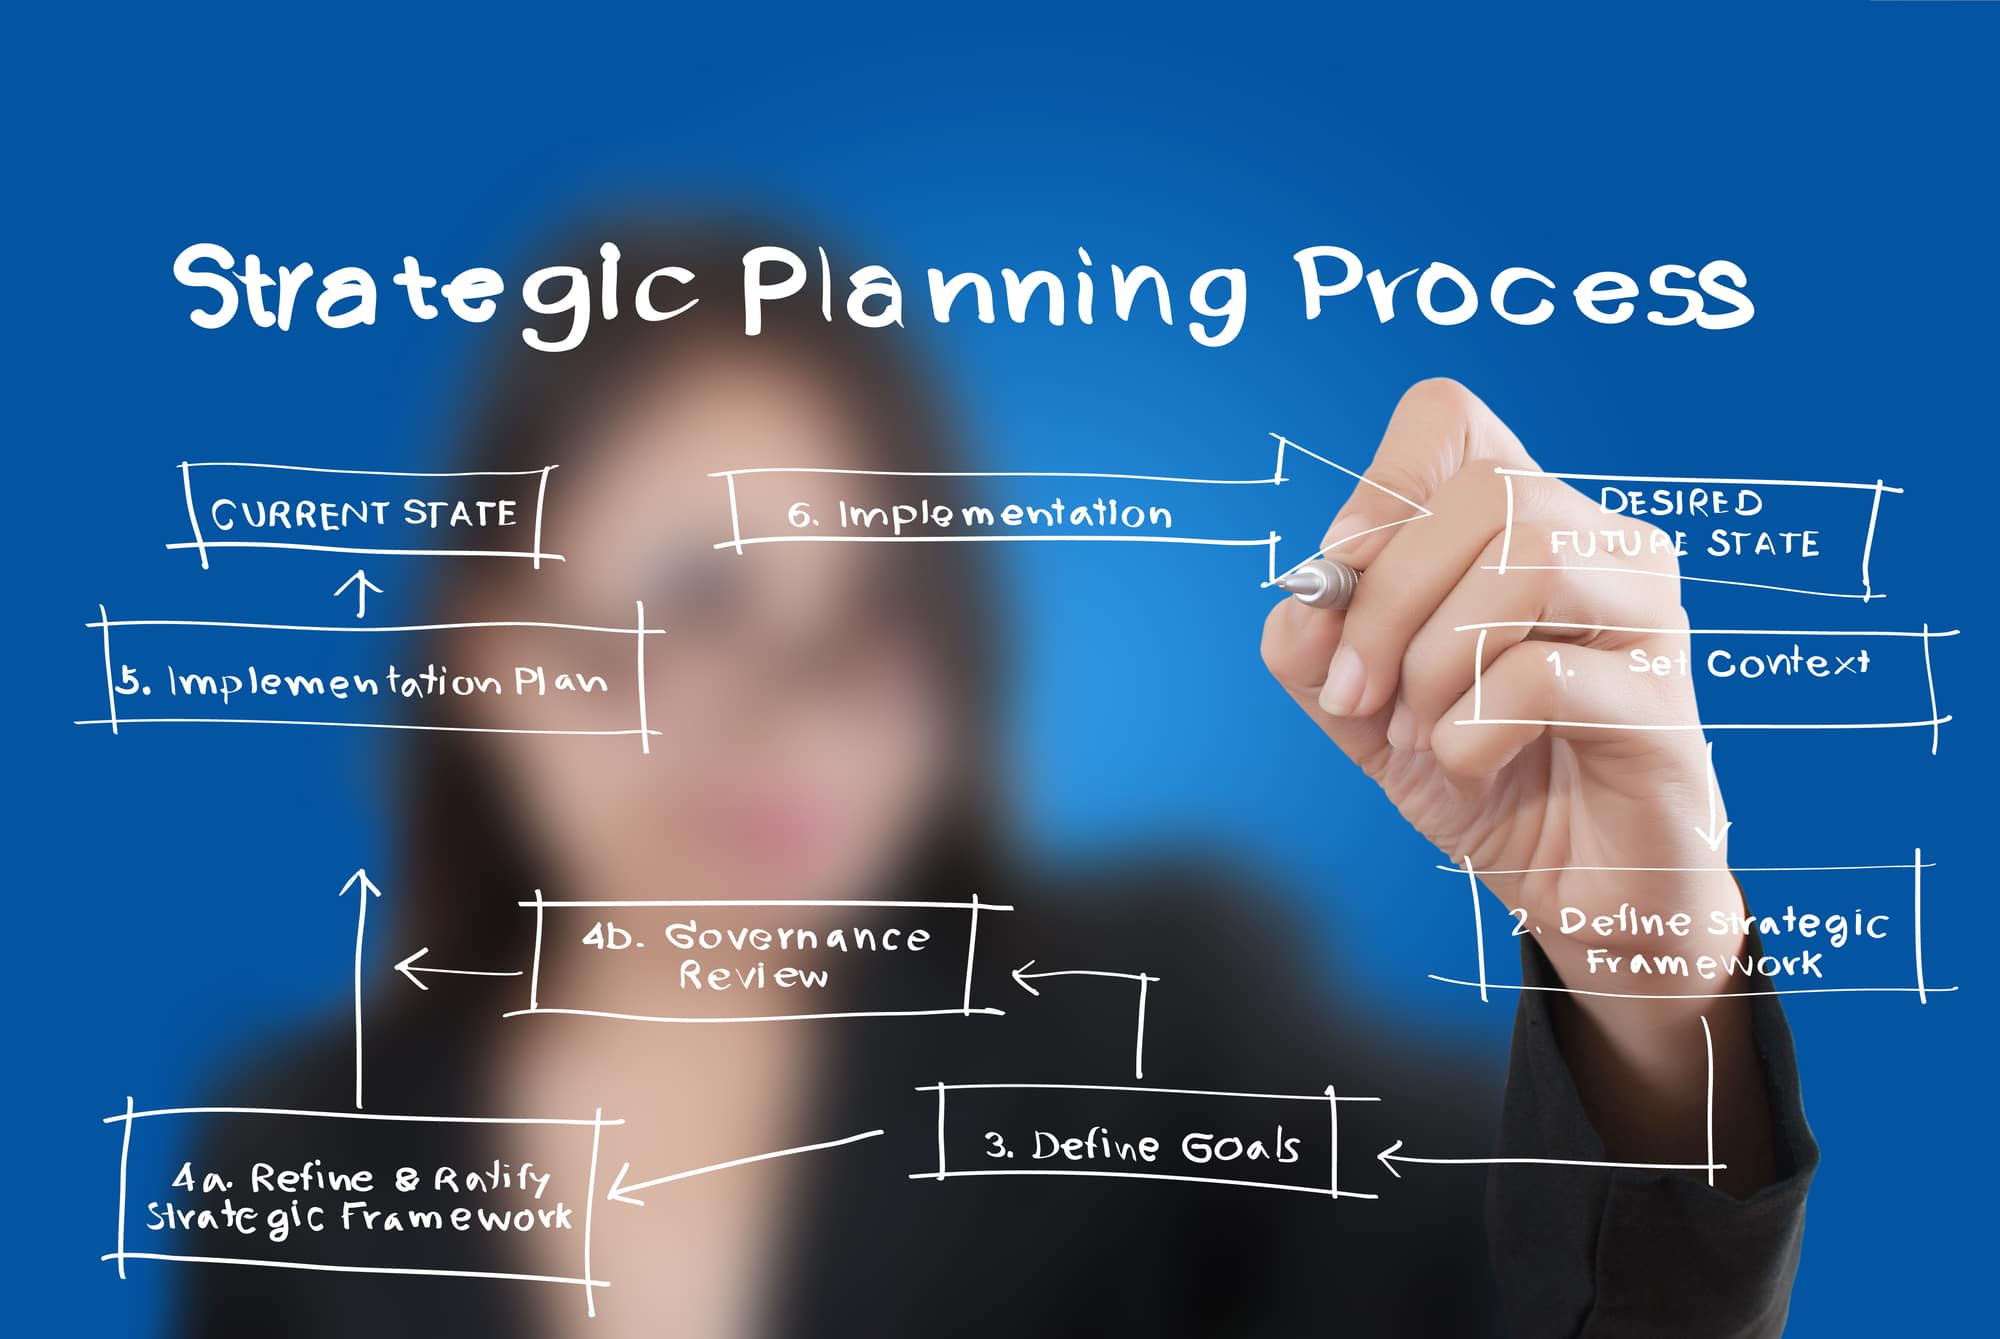 what are the strategic planning process